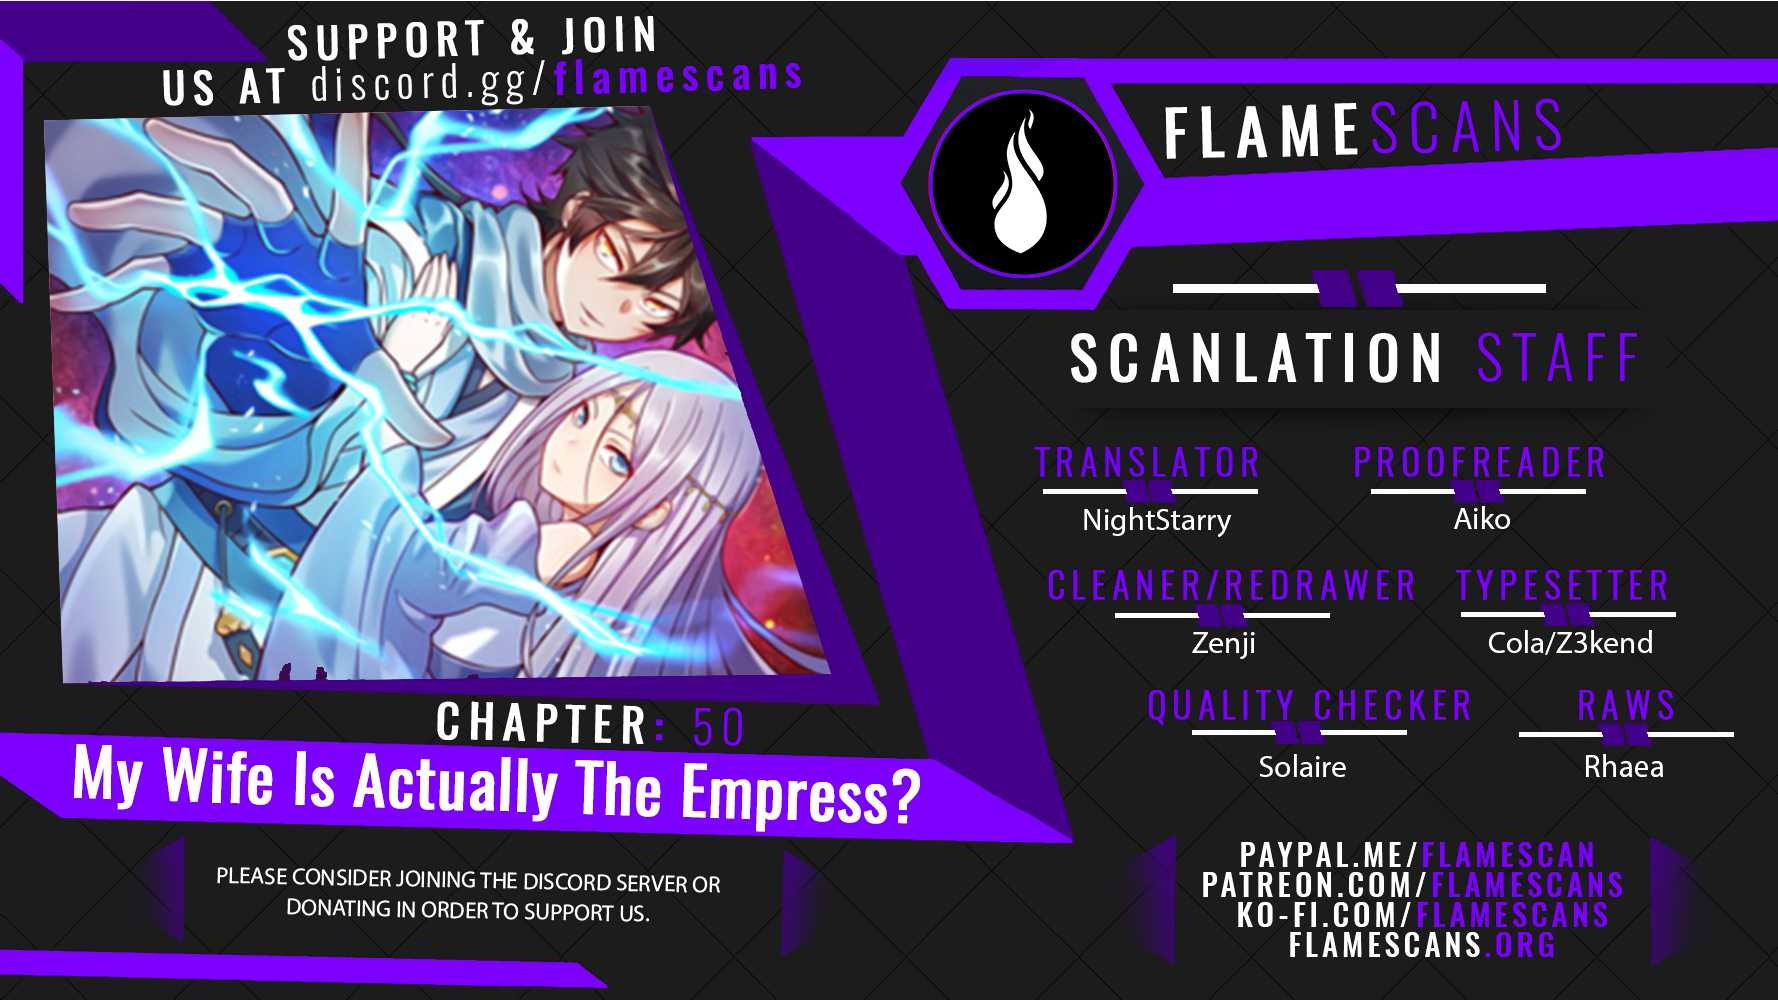 My Wife Is Actually The Empress? - Chapter 11020 - Image 1